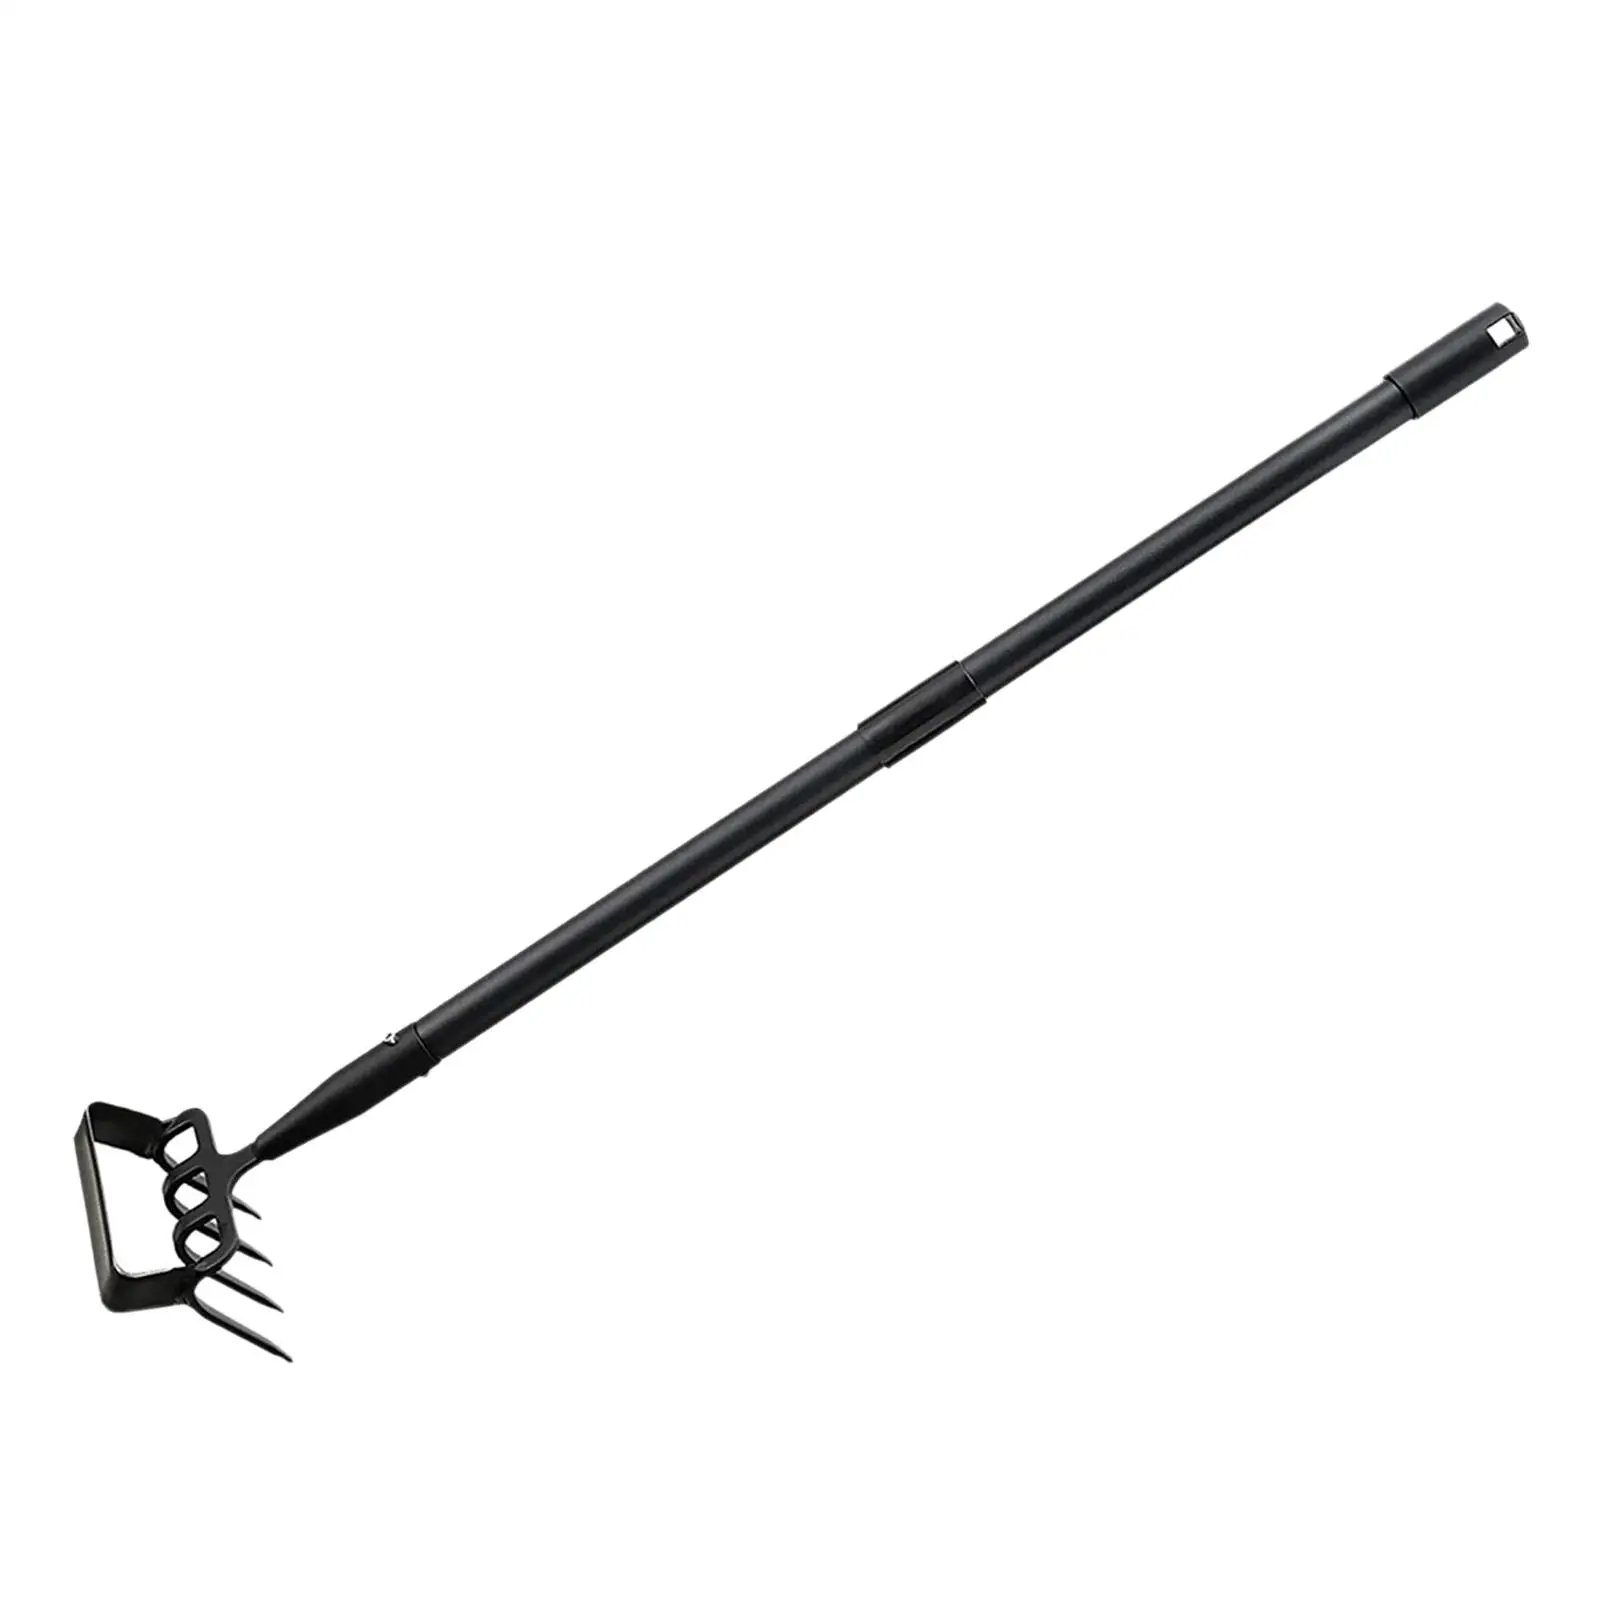 Stirrup Hoe and Cultivator Lightweight 2 in 1 with Long Handle Hoe Garden Tool for Loosening Planting Plowing Cultivating Lawn